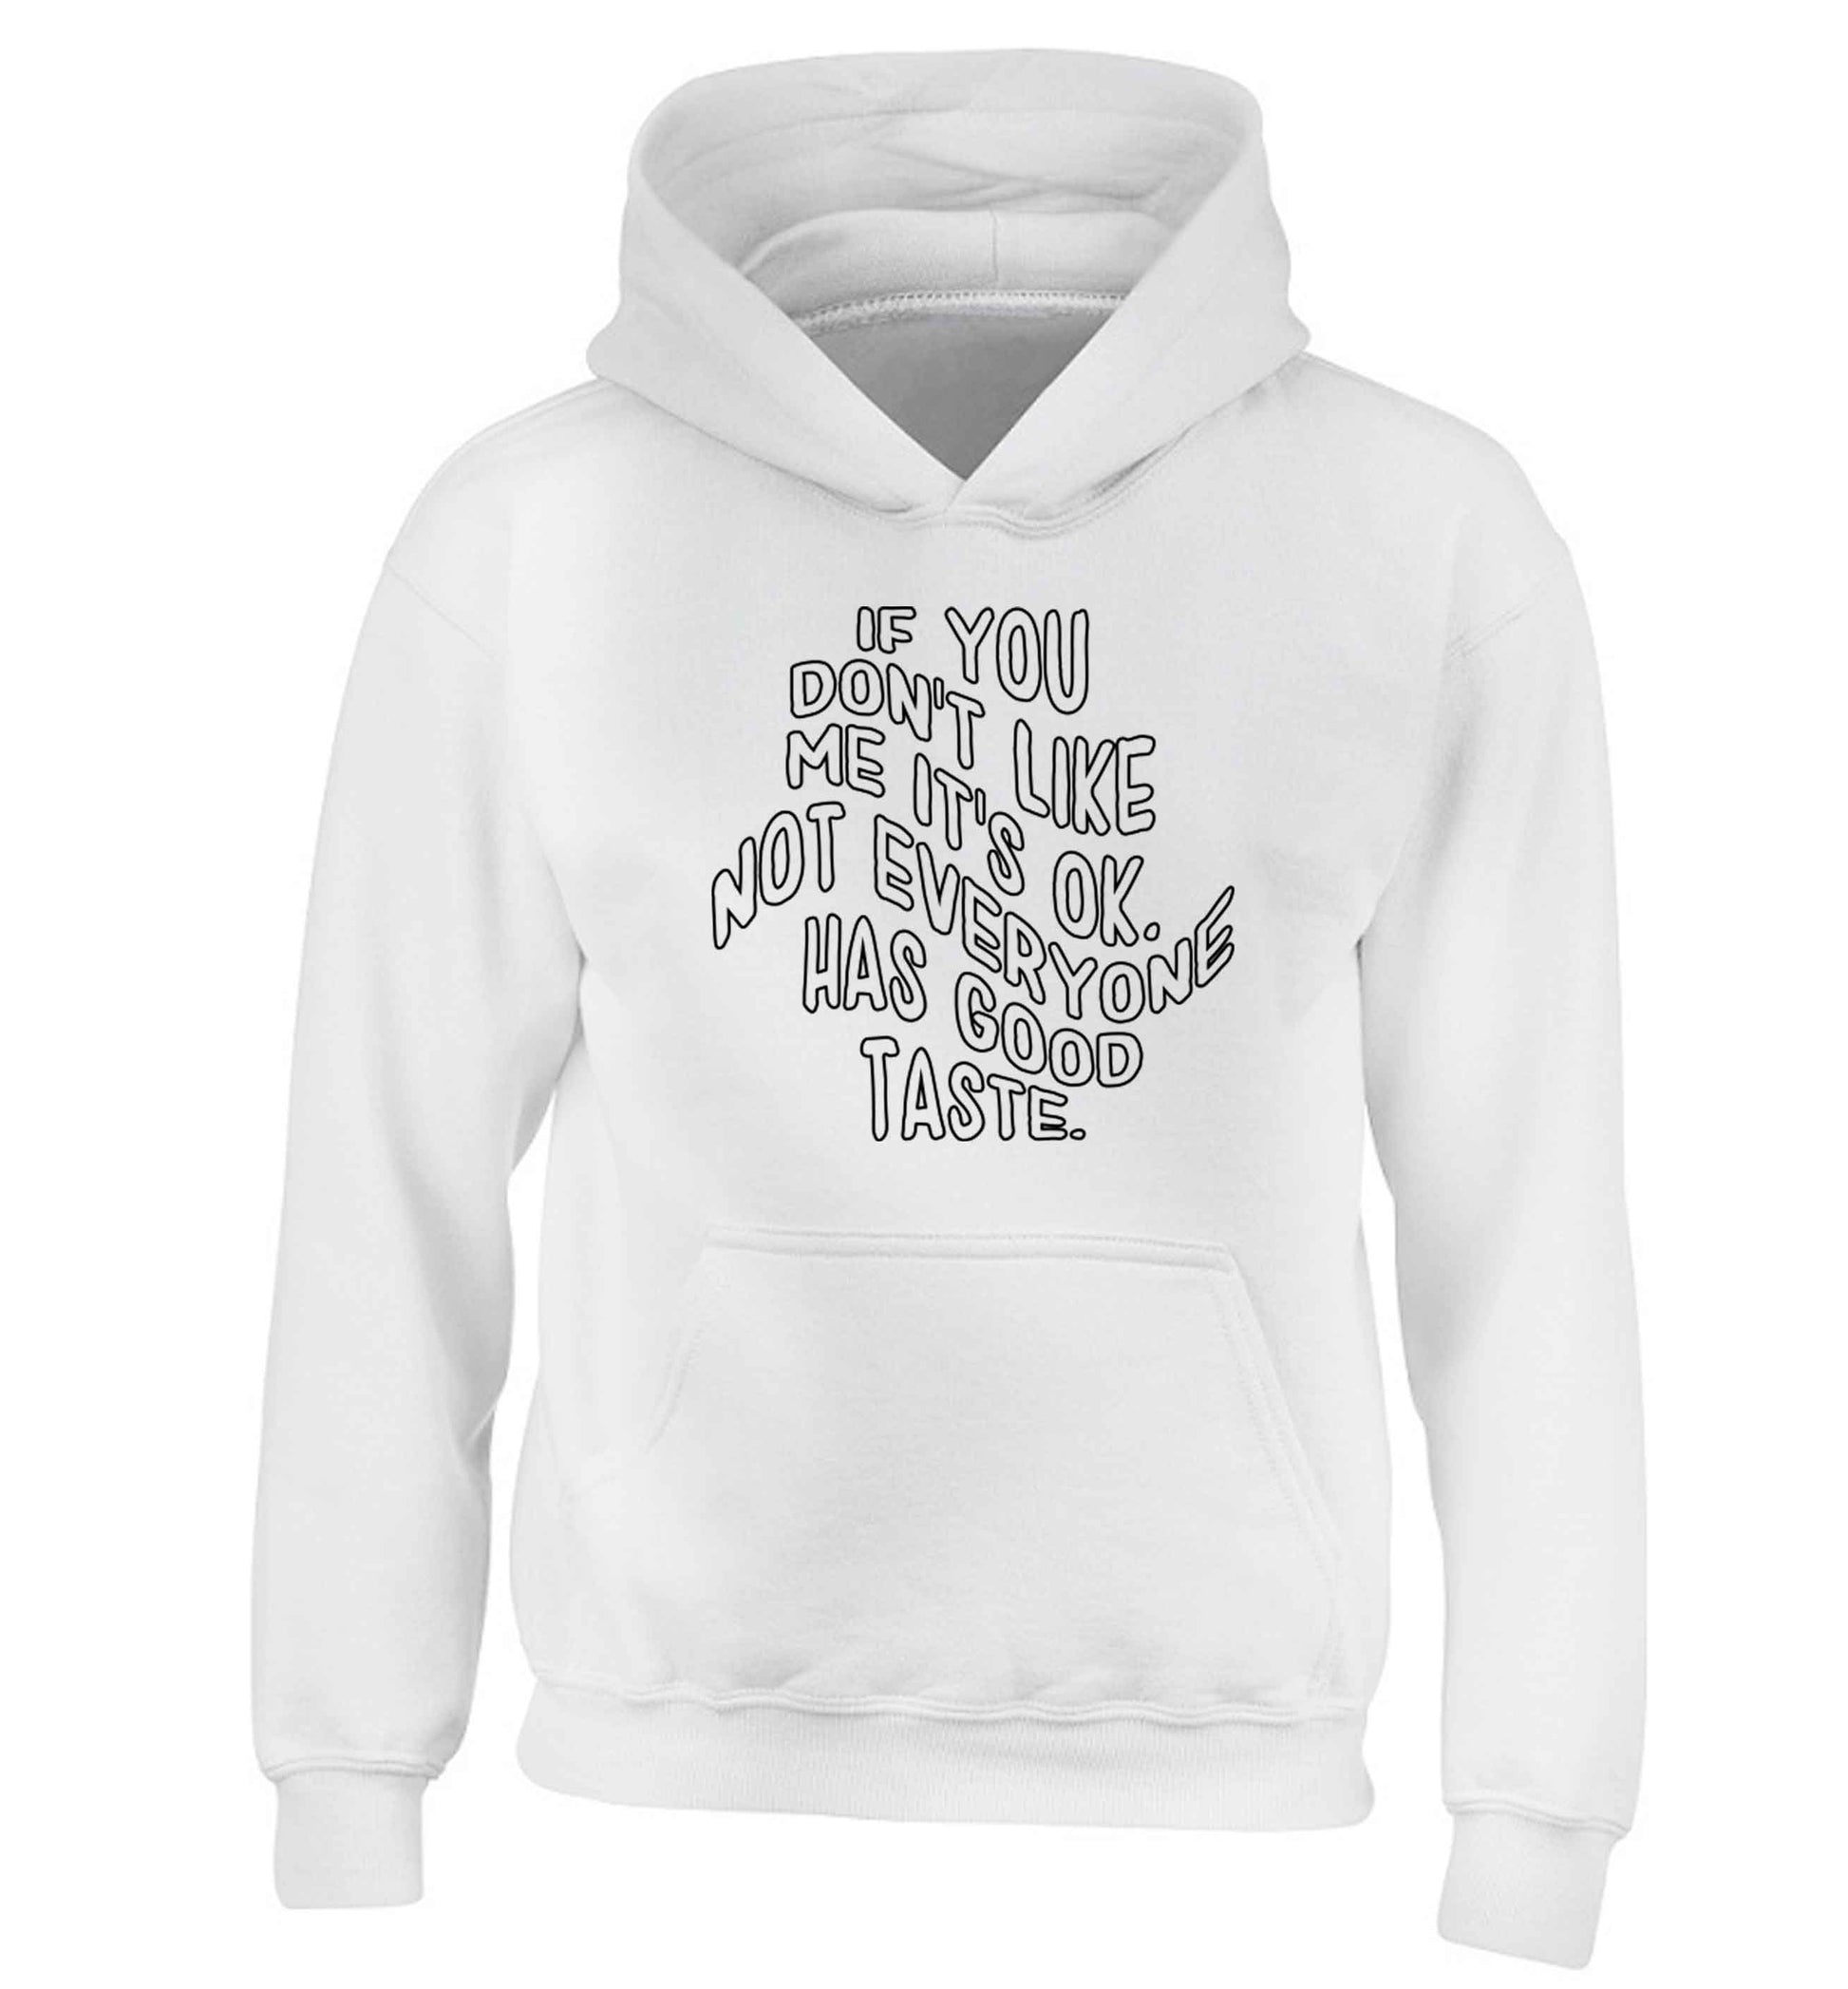 If you don't like me it's ok not everyone has good taste children's white hoodie 12-13 Years